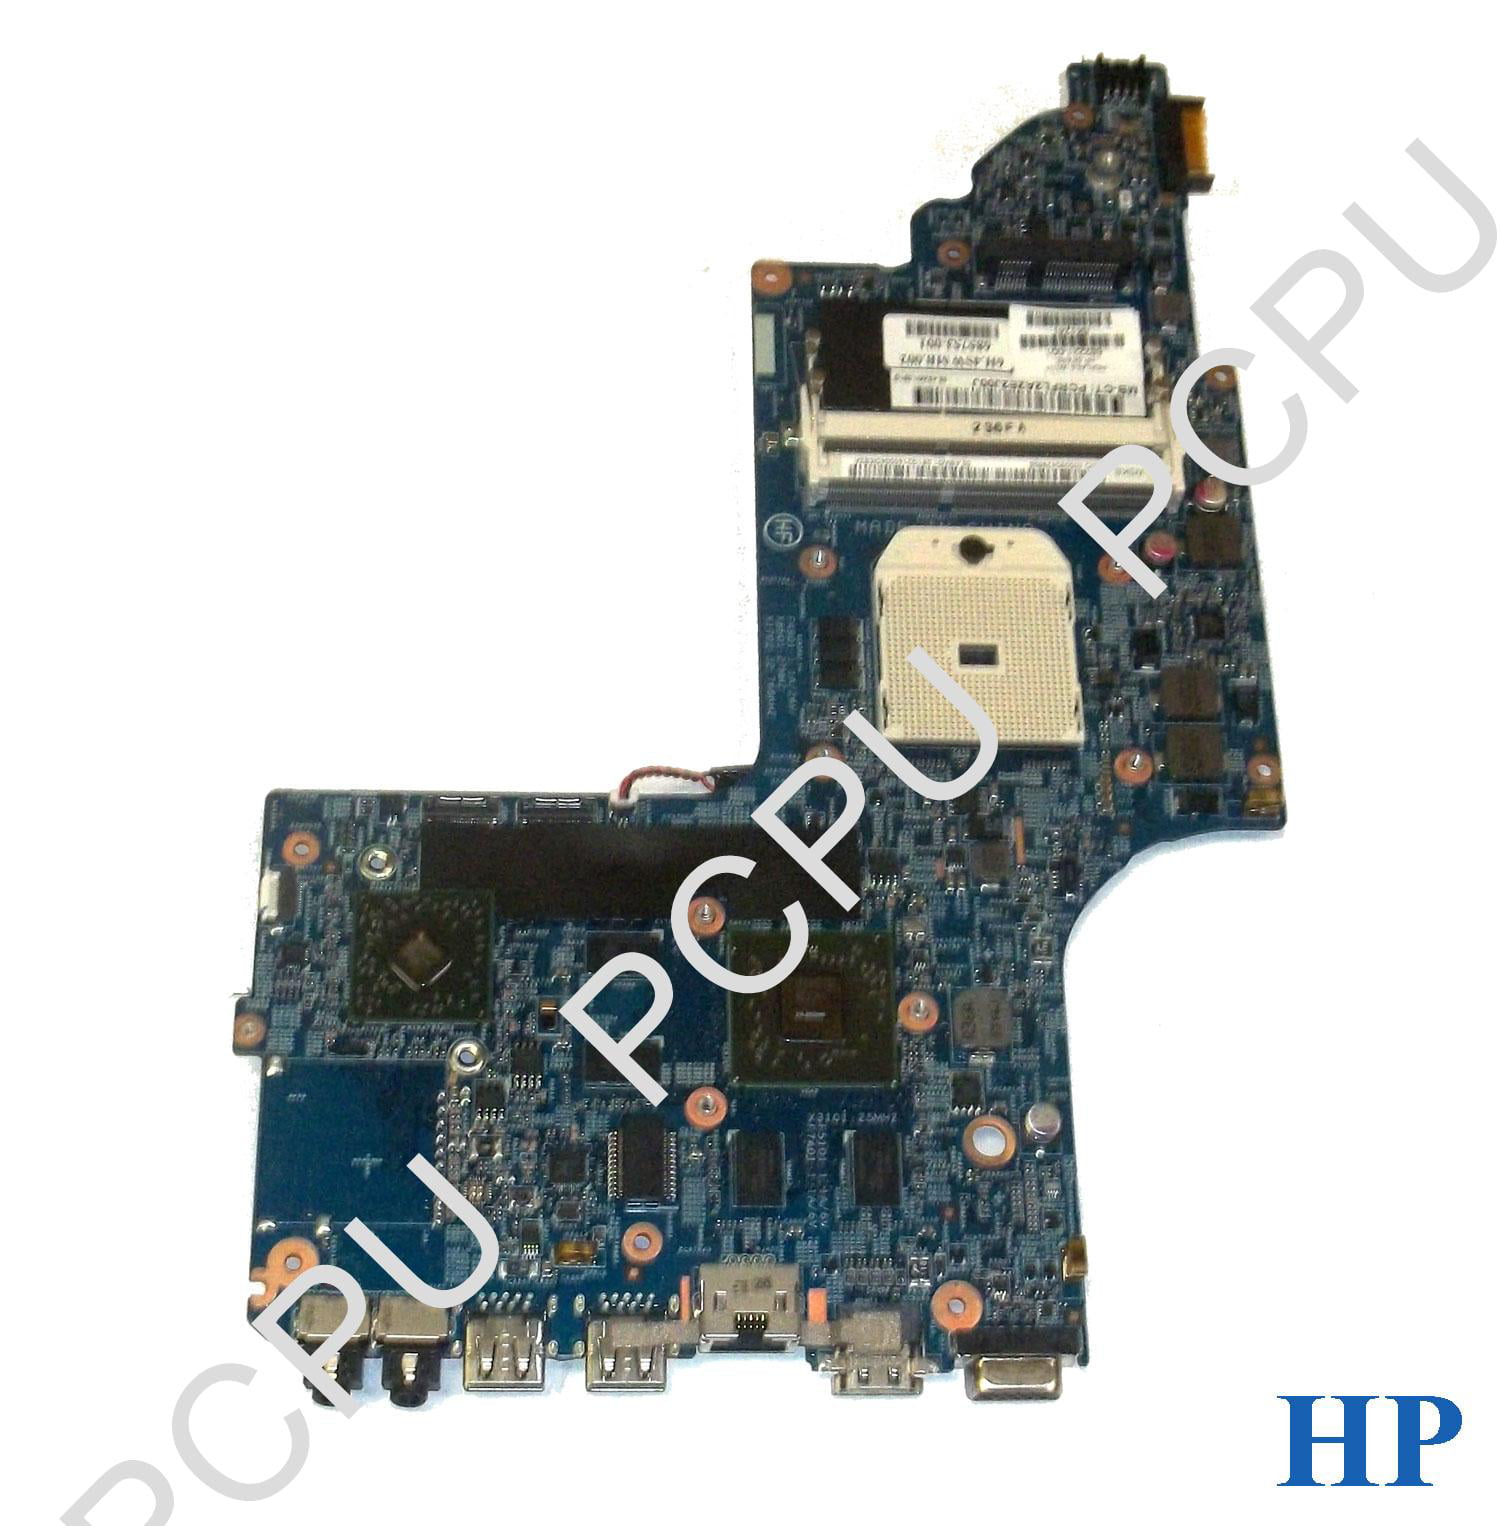 FMB-I Compatible with 837769-601 Replacement for Hp Dsc 940m 2gb I7-6500u 3dc Motherboard 17-N179NR